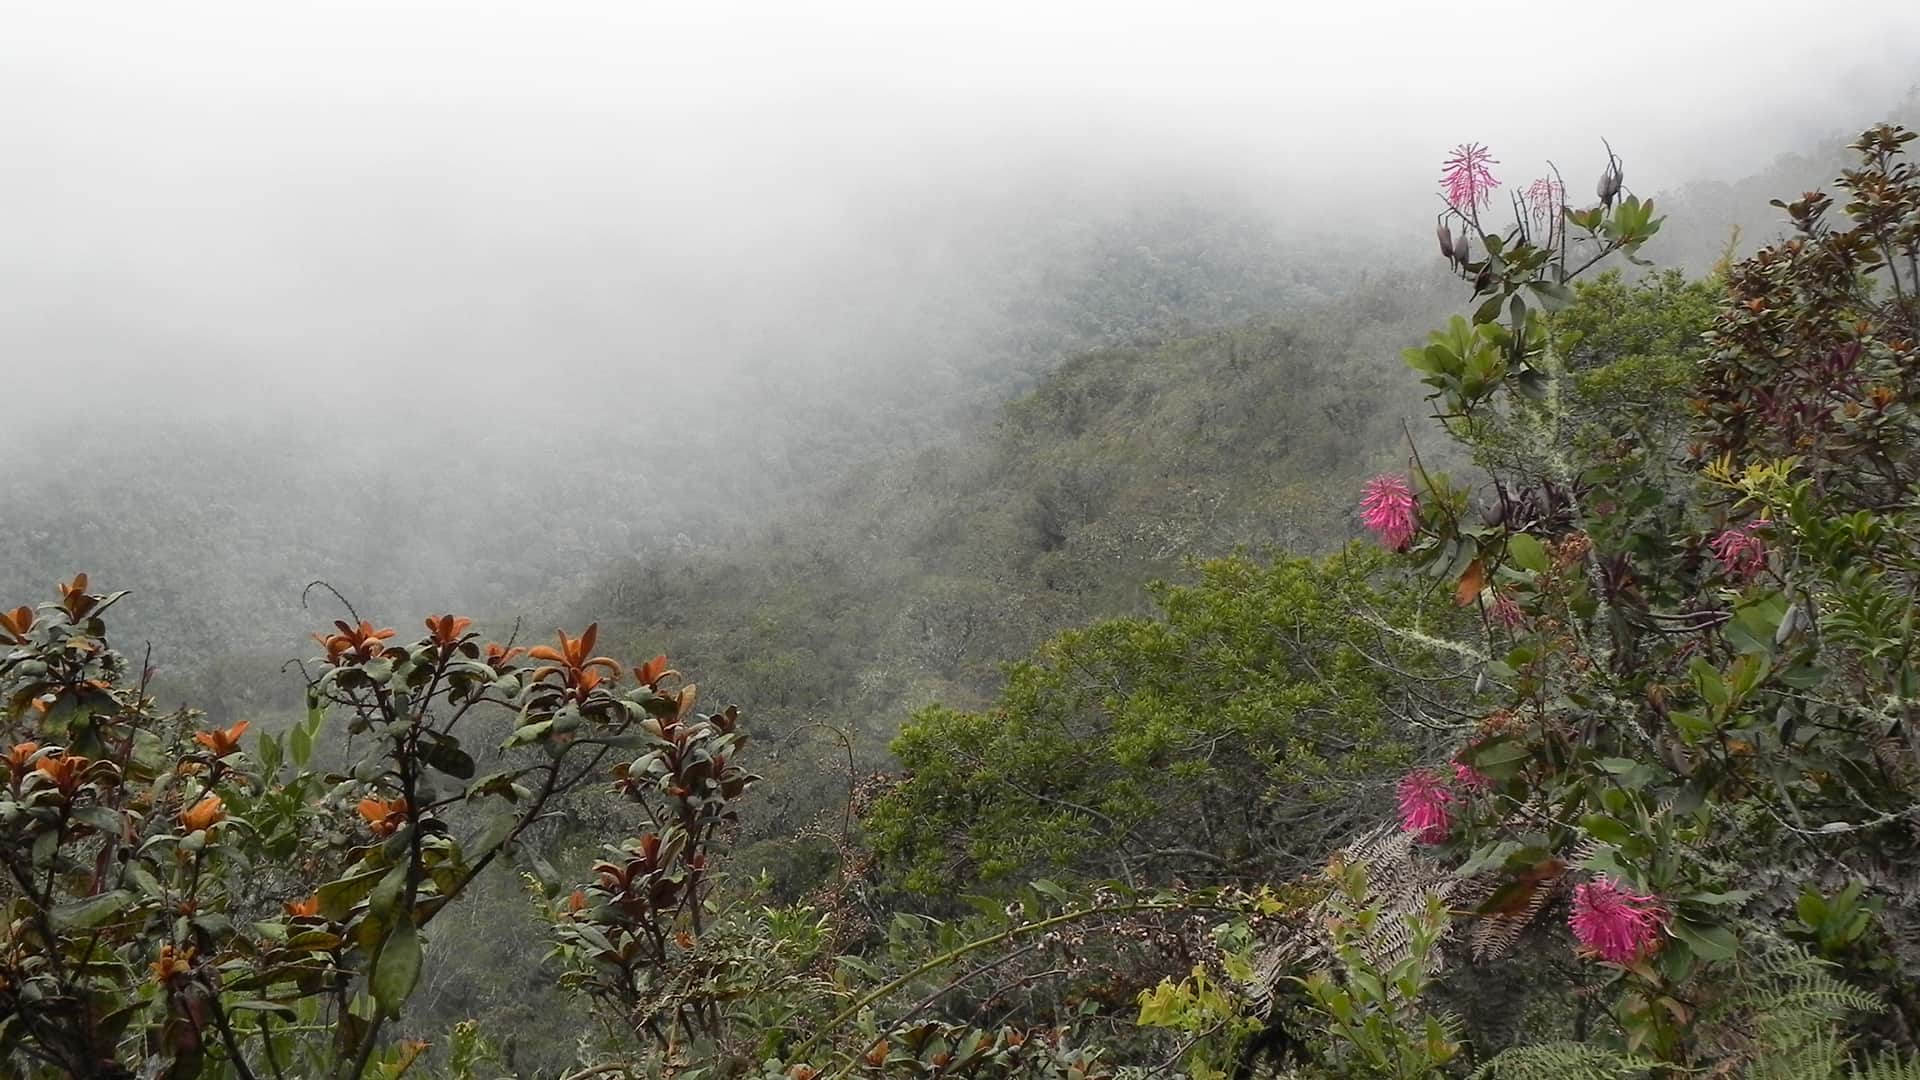 Flowering plants and fog in the Manu cloud forest